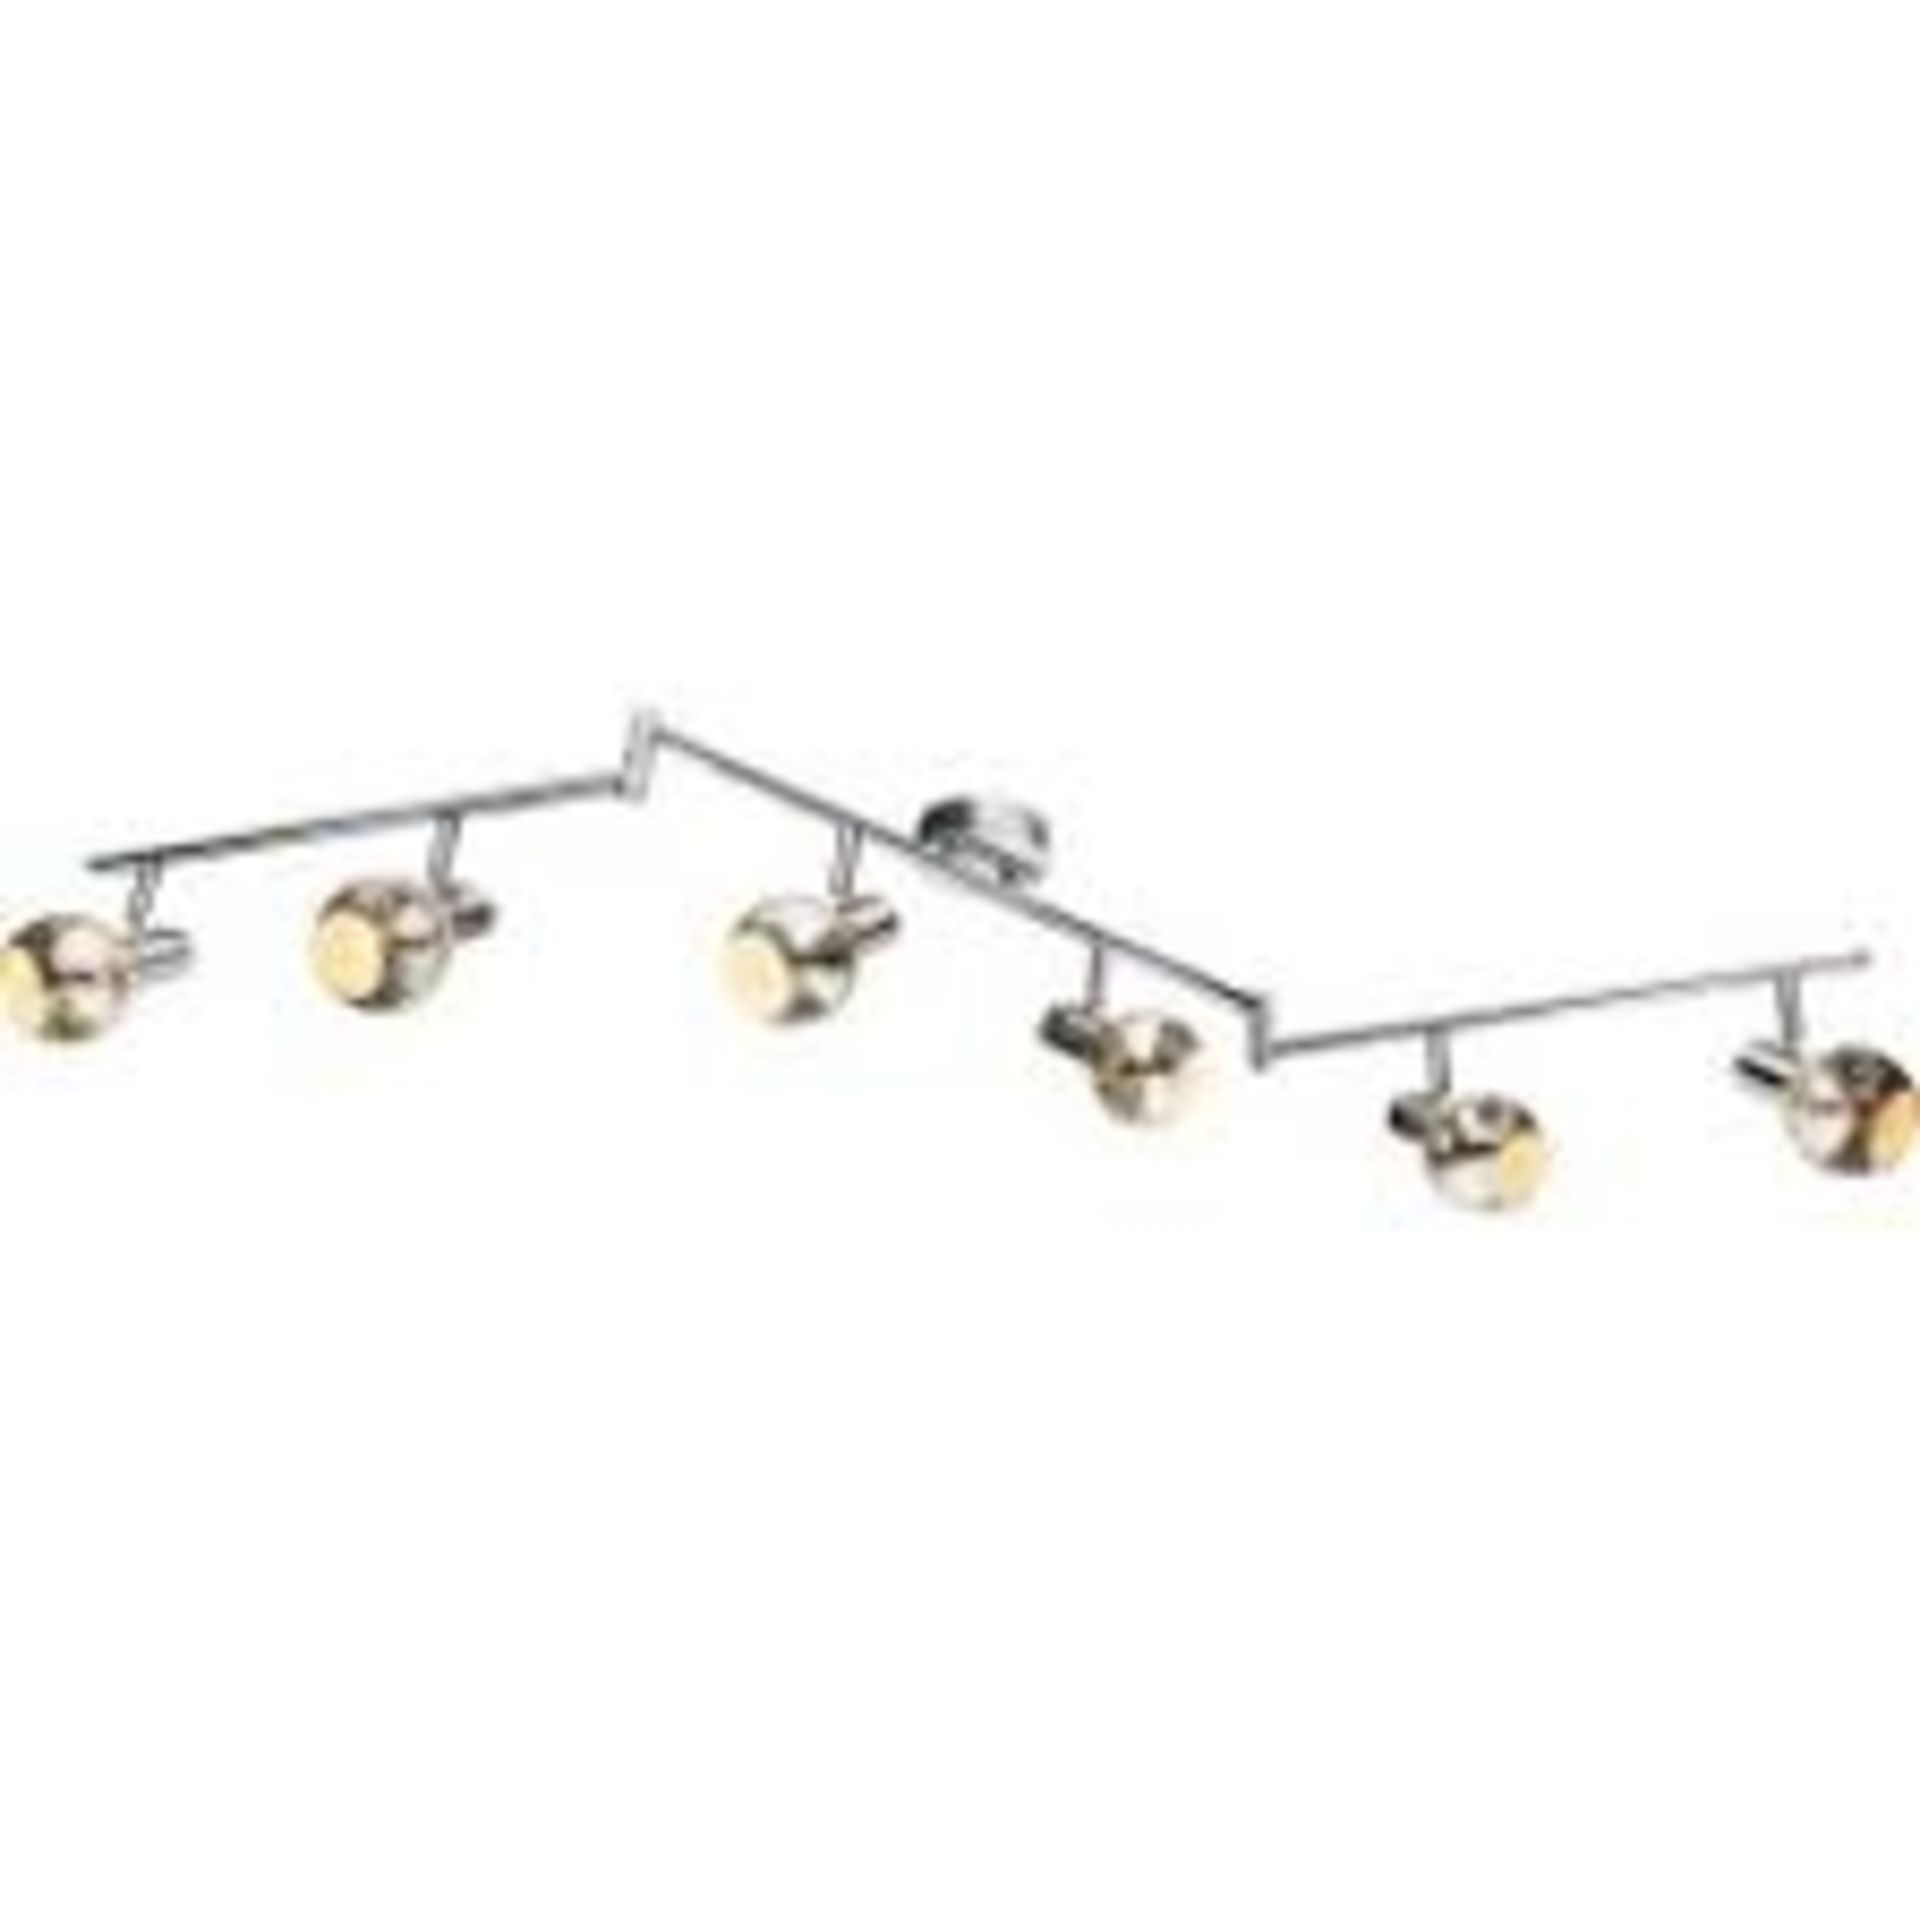 Boxed 6 Light Gumther Track Kit Ceiling Light RRP £110 (16509) (Pictures Are For Illustration